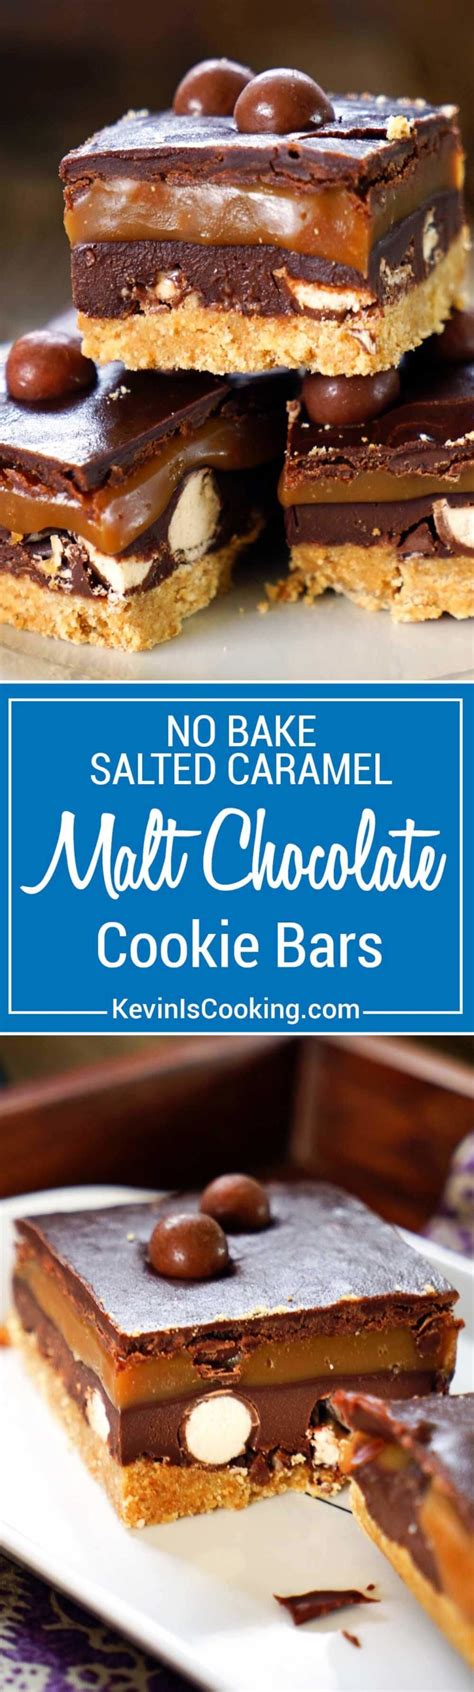 Made with peanut butter rolled oats and a delicious chocolate peanut butter filling. No Bake Chocolate Cookie Bars - Kevin Is Cooking